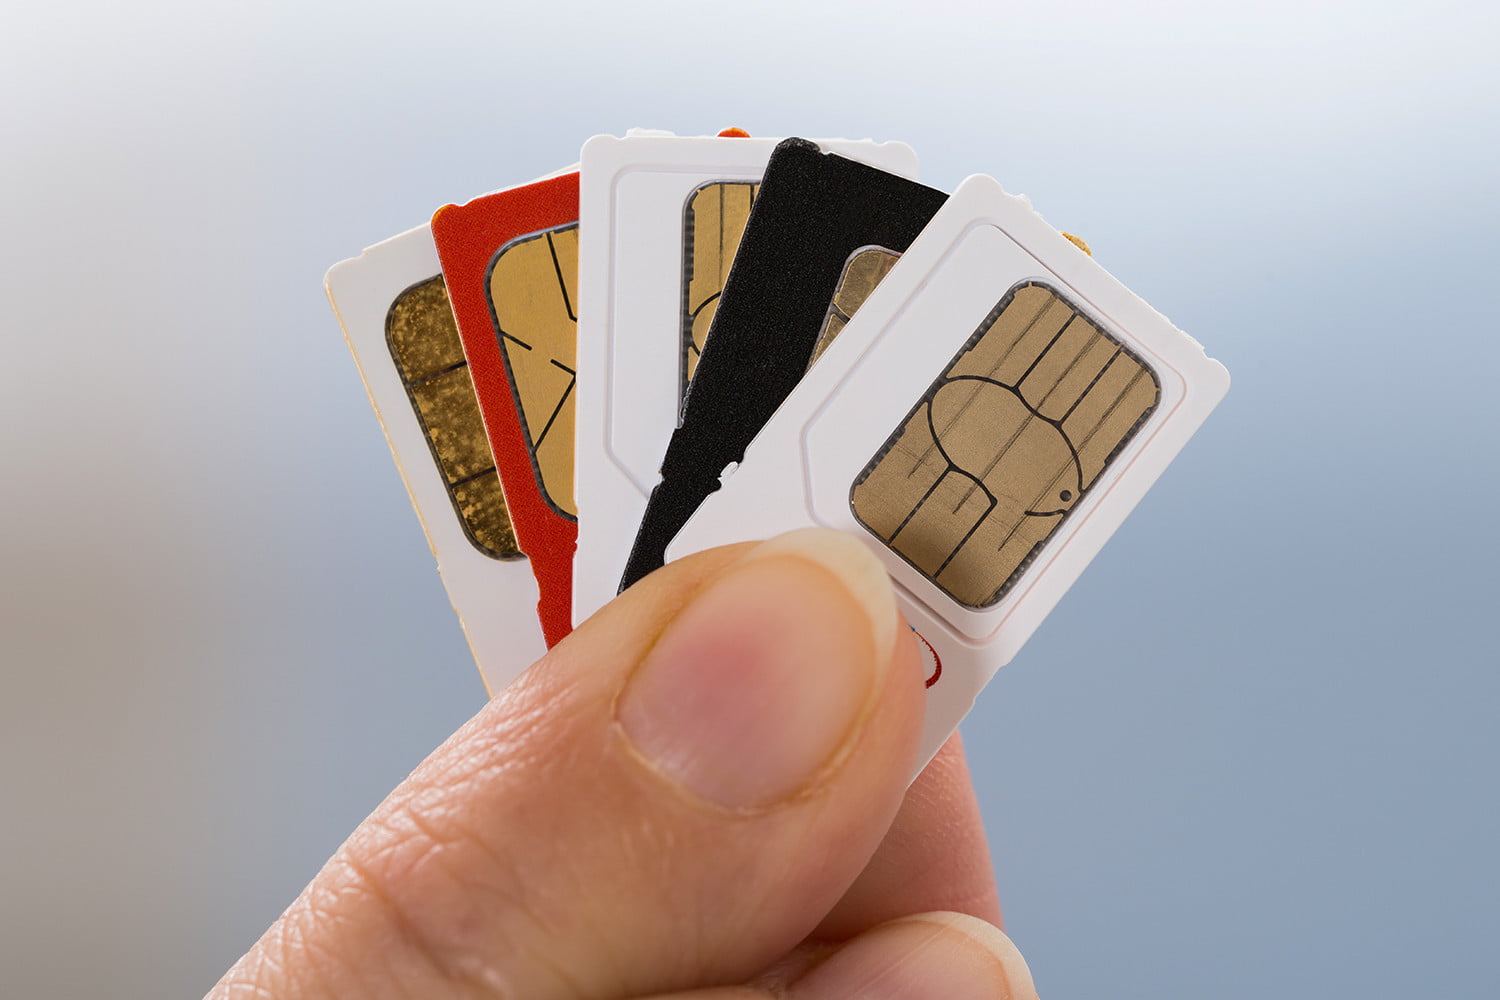 SIM Swap Attacks are increasing nowadays– how to prevent them